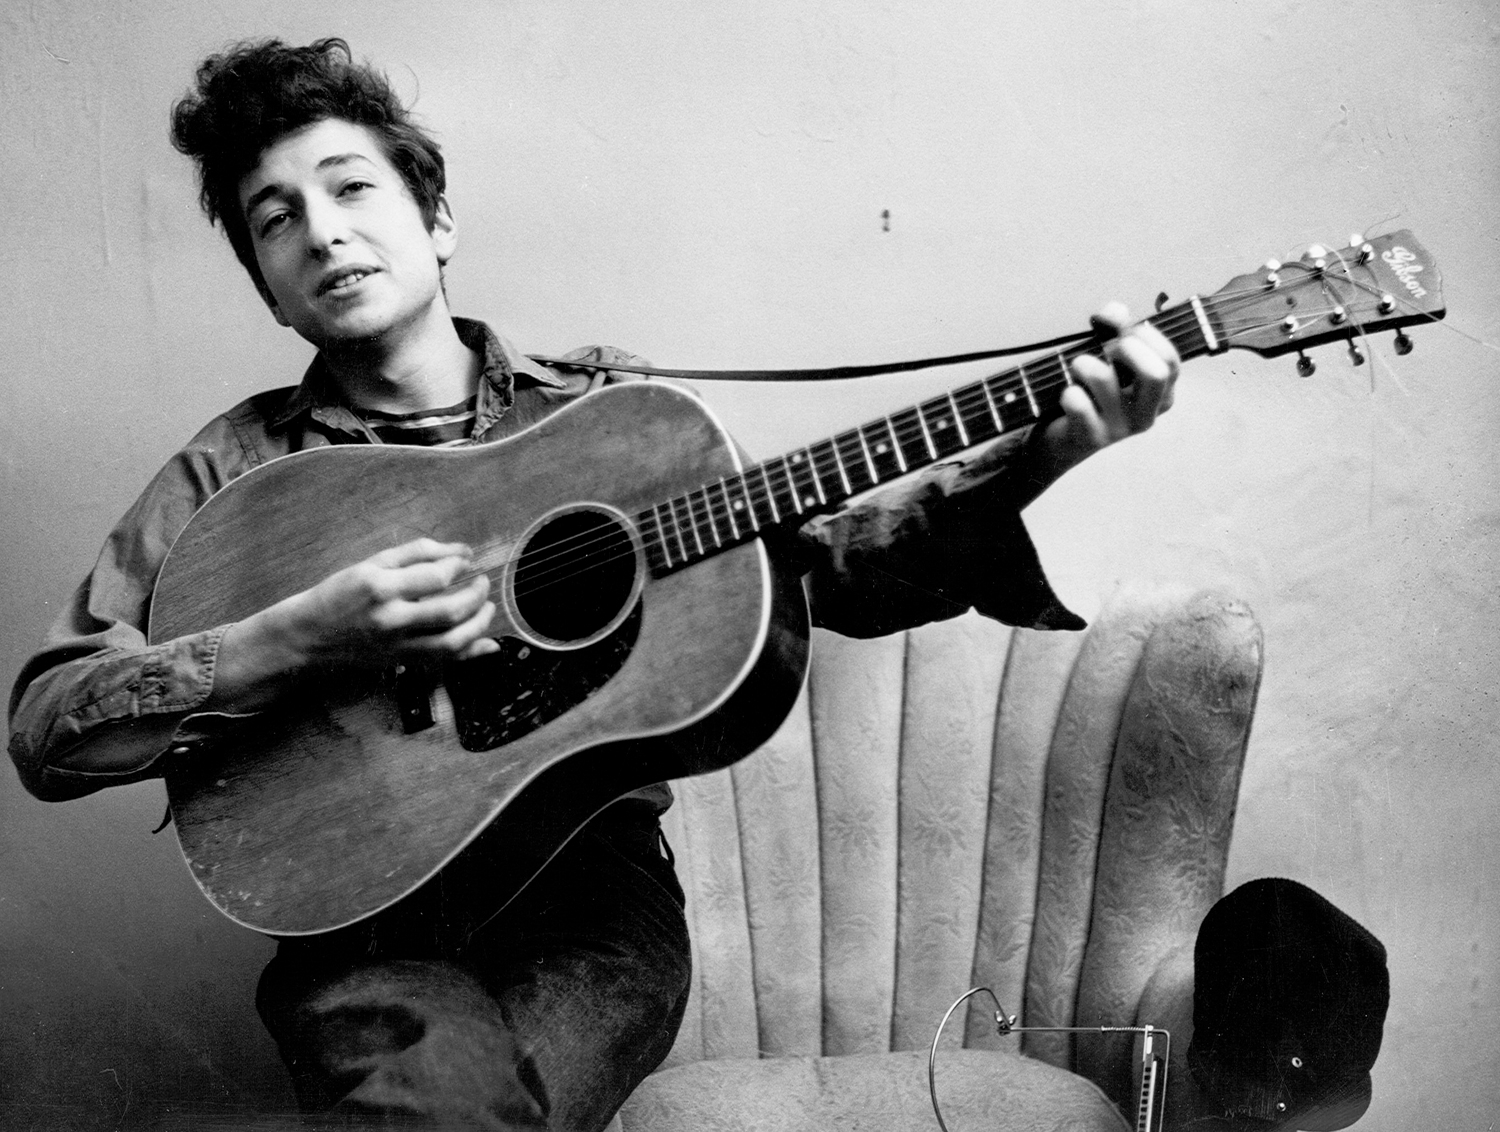 Bob dylan with his guitar